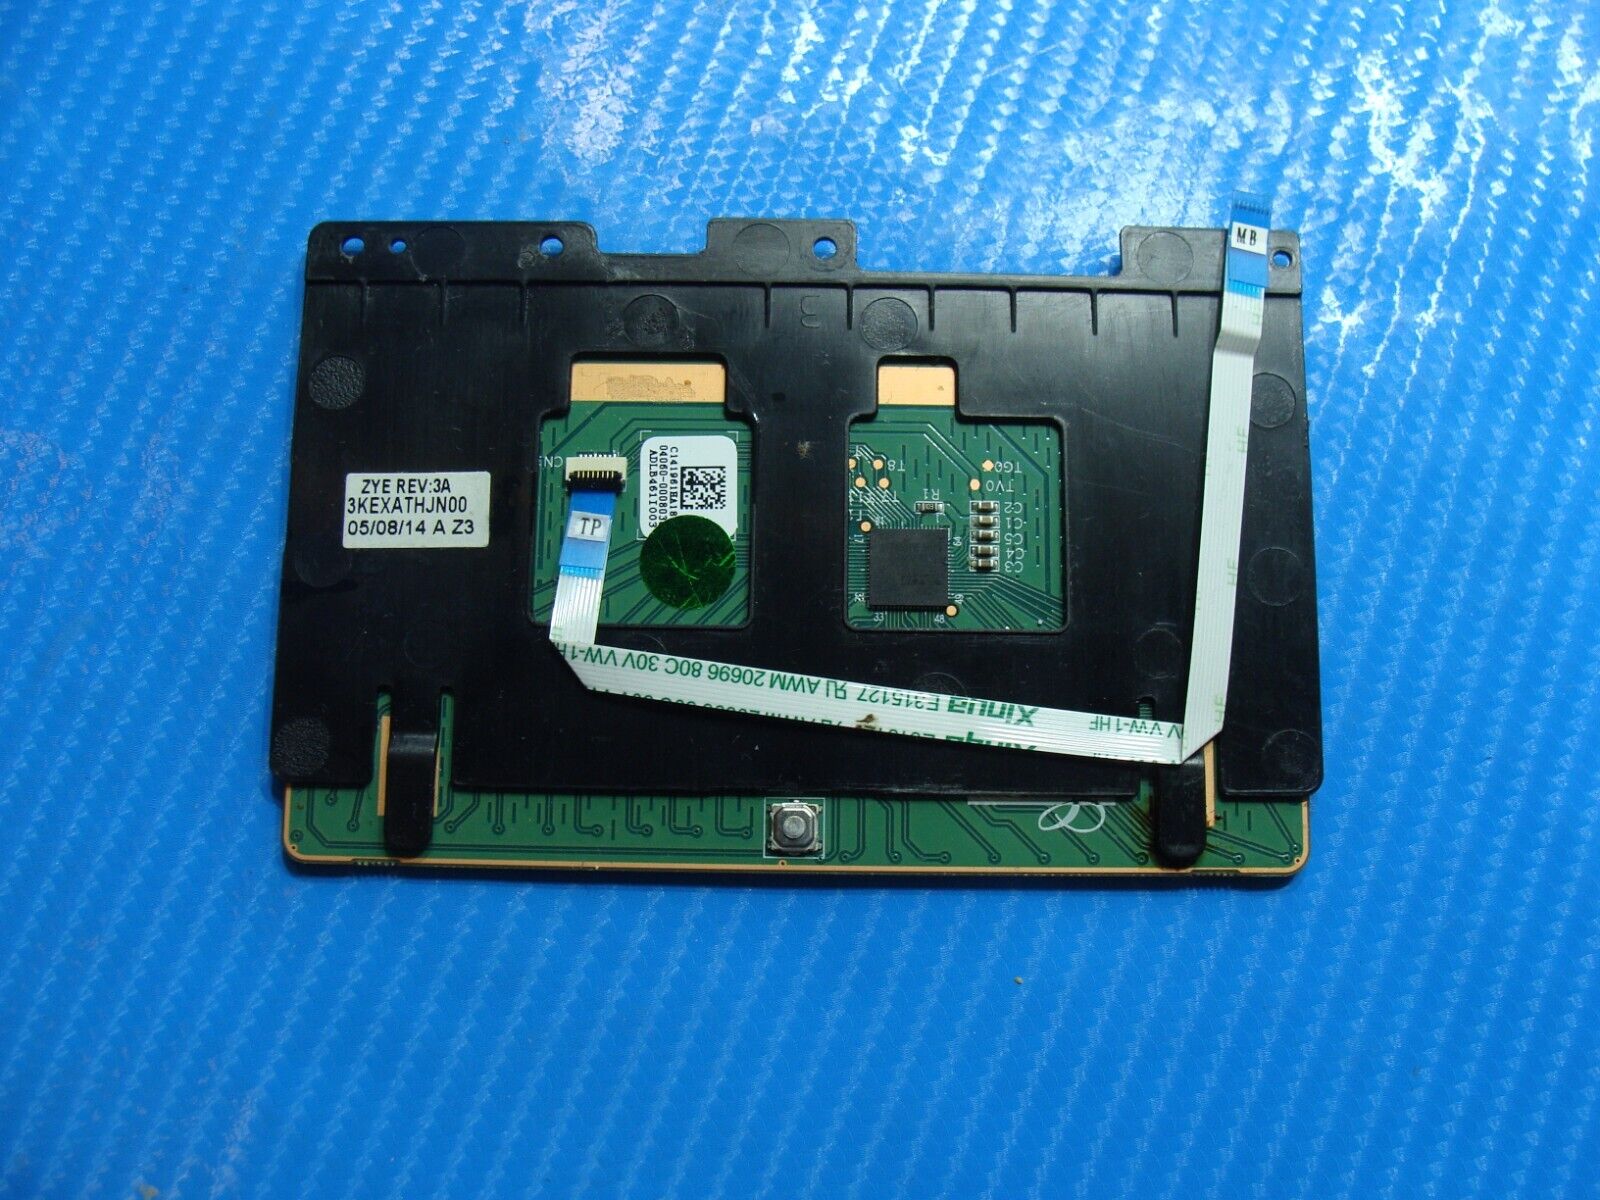 Asus VivoBook 13.3” S301LA OEM Touchpad Mouse Button Board w/Cable 3KEXATHJN00